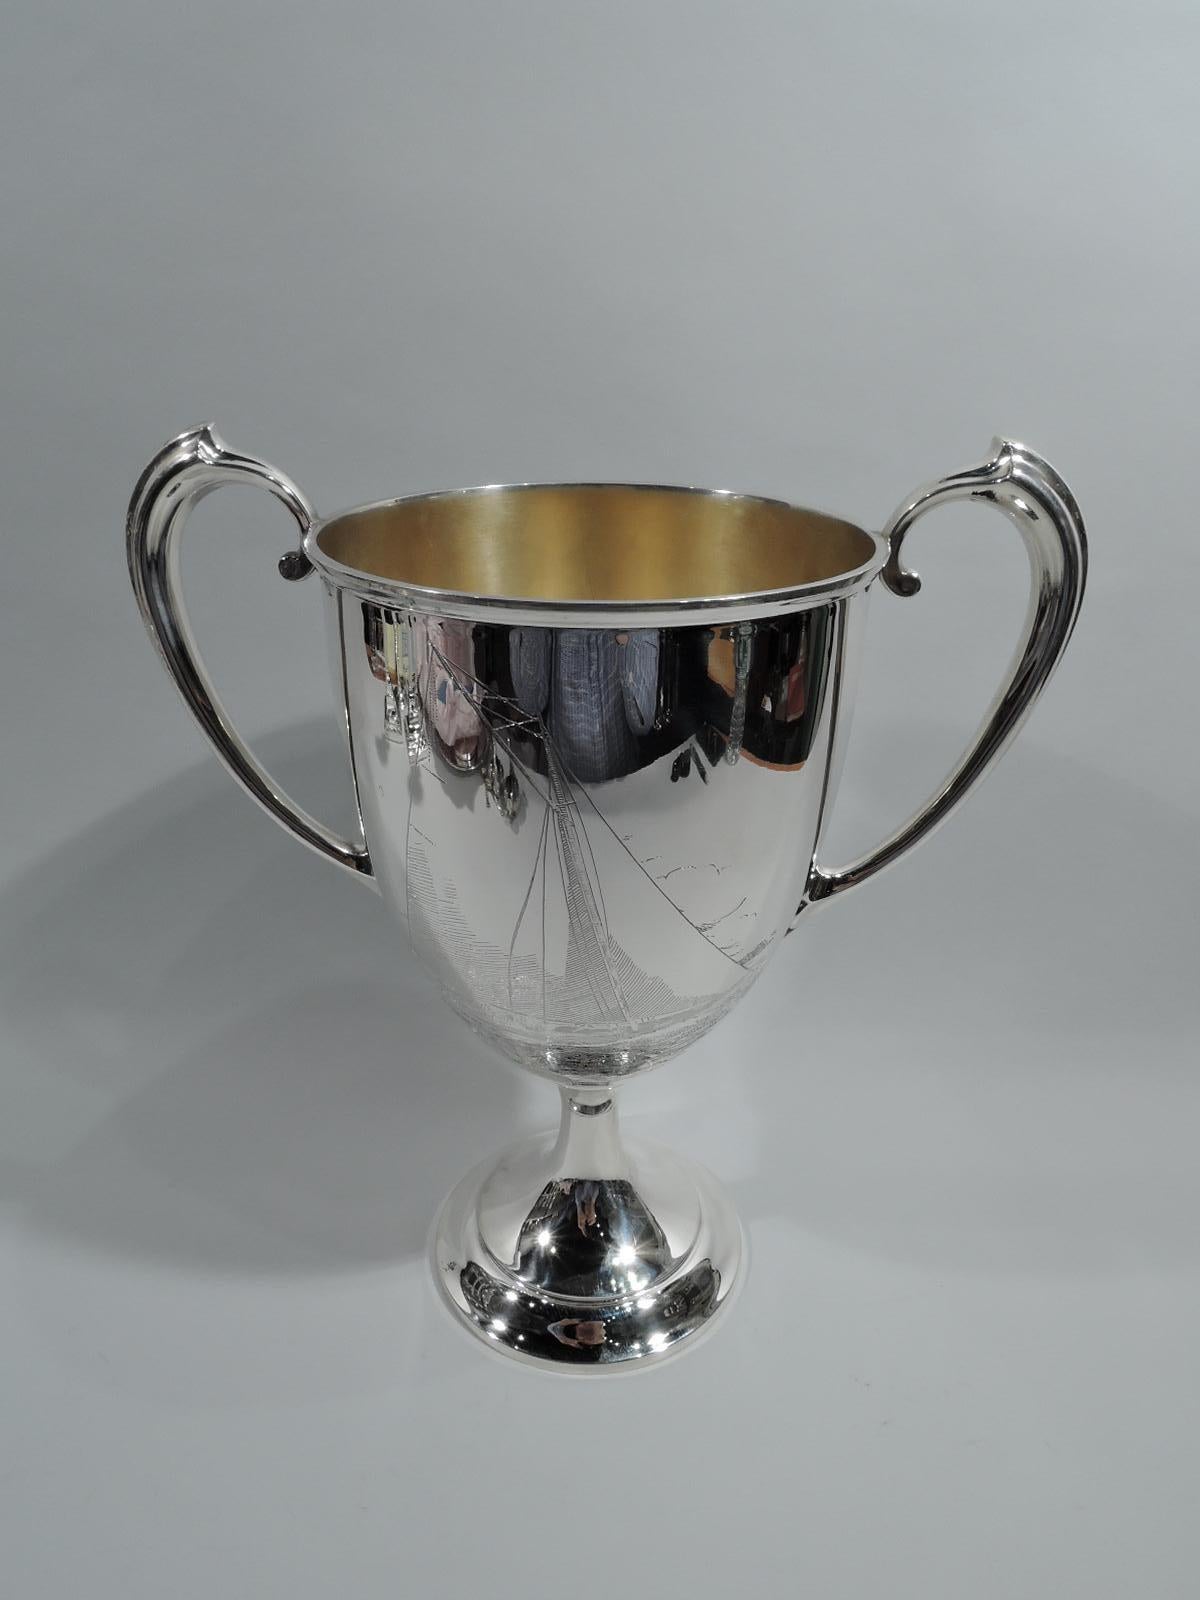 Edwardian Neoclassical sterling silver trophy cup. Made by Gorham in Providence. Oval bowl with high-looping handles and raised foot. Engraved presentation on front: “Inter-Lake Yachting Association / Class Q. Trophy / Presented by / Commodore Emil